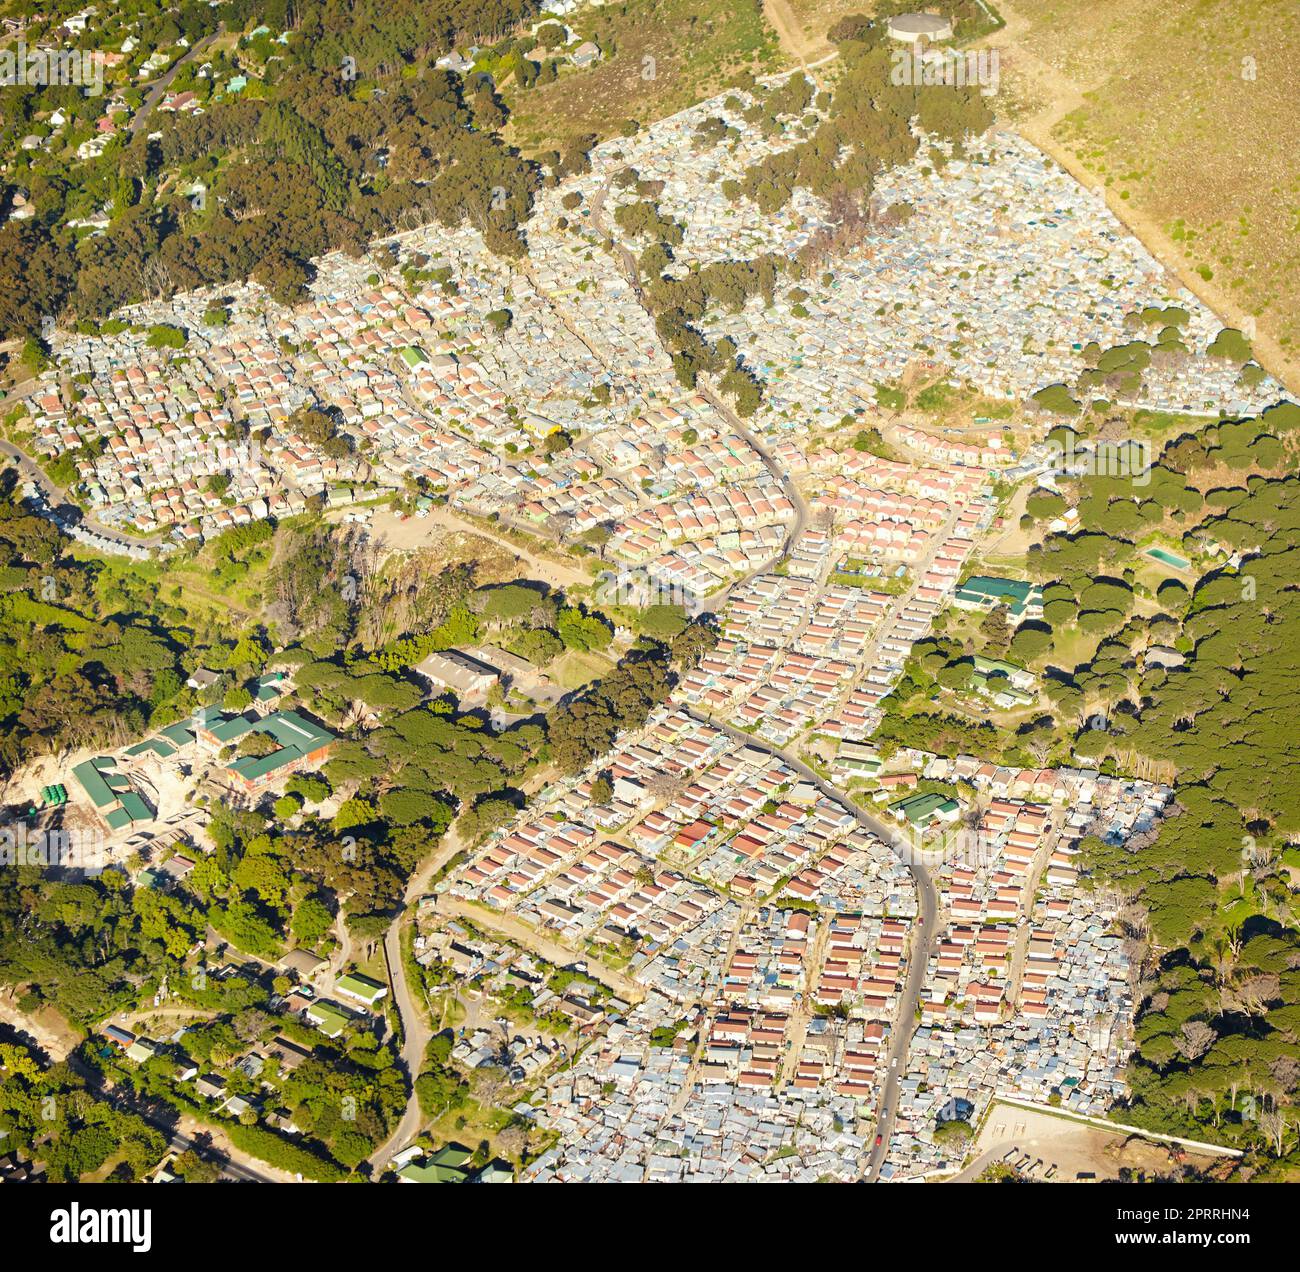 Rural development. Aerial view of a small urband development in the countryside. Stock Photo